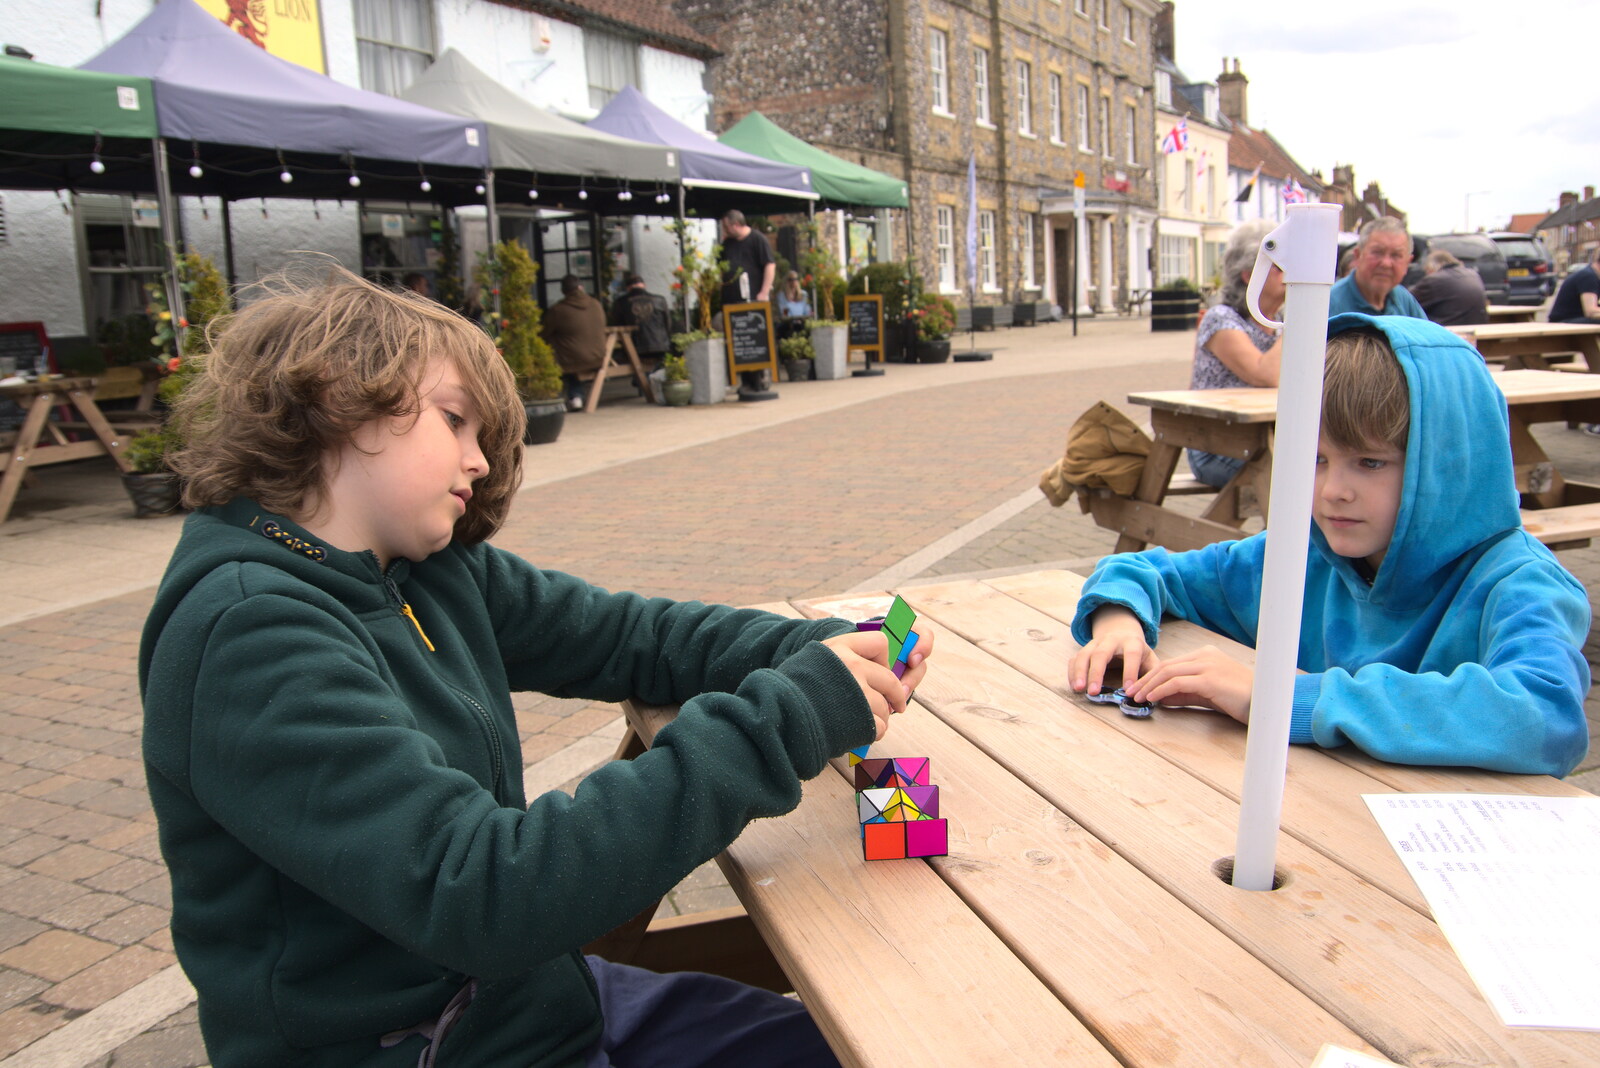 Fred plays with his new magic cube thing from A Vaccination Afternoon, Swaffham, Norfolk - 9th May 2021